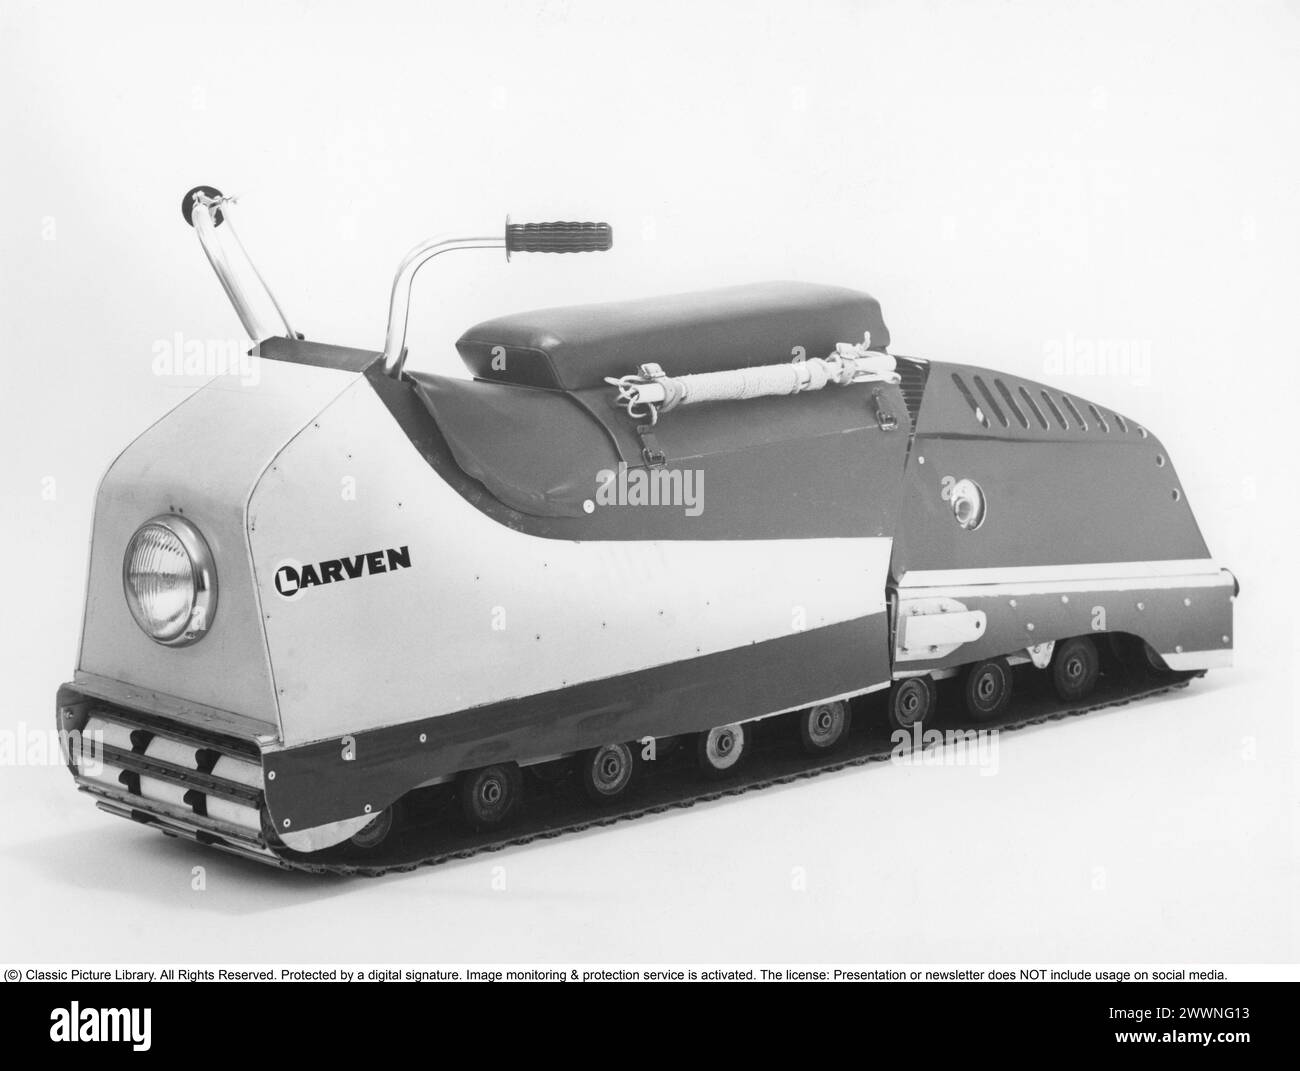 'Larven' (The caterpillar) A Swedish unconventional snowmobile that has now reached cult status. It consisted of a long caterpillar track with a seat where the driver sat and steered with the help of his weight and with his skis. It was launched in 1965 and manufactured by the company Lenko in Östersund, founded by Lennart Nilsson. When it was launched, it cost SEK 3,000. About 4,500 examples were built in total. Top speed was 48 km/h. The caterpillar was propelled forward with fiberglass-reinforced plastic bands. The caterpillar was 178 cm long, 81 cm wide with a total weight of 76 kg. Alumin Stock Photo